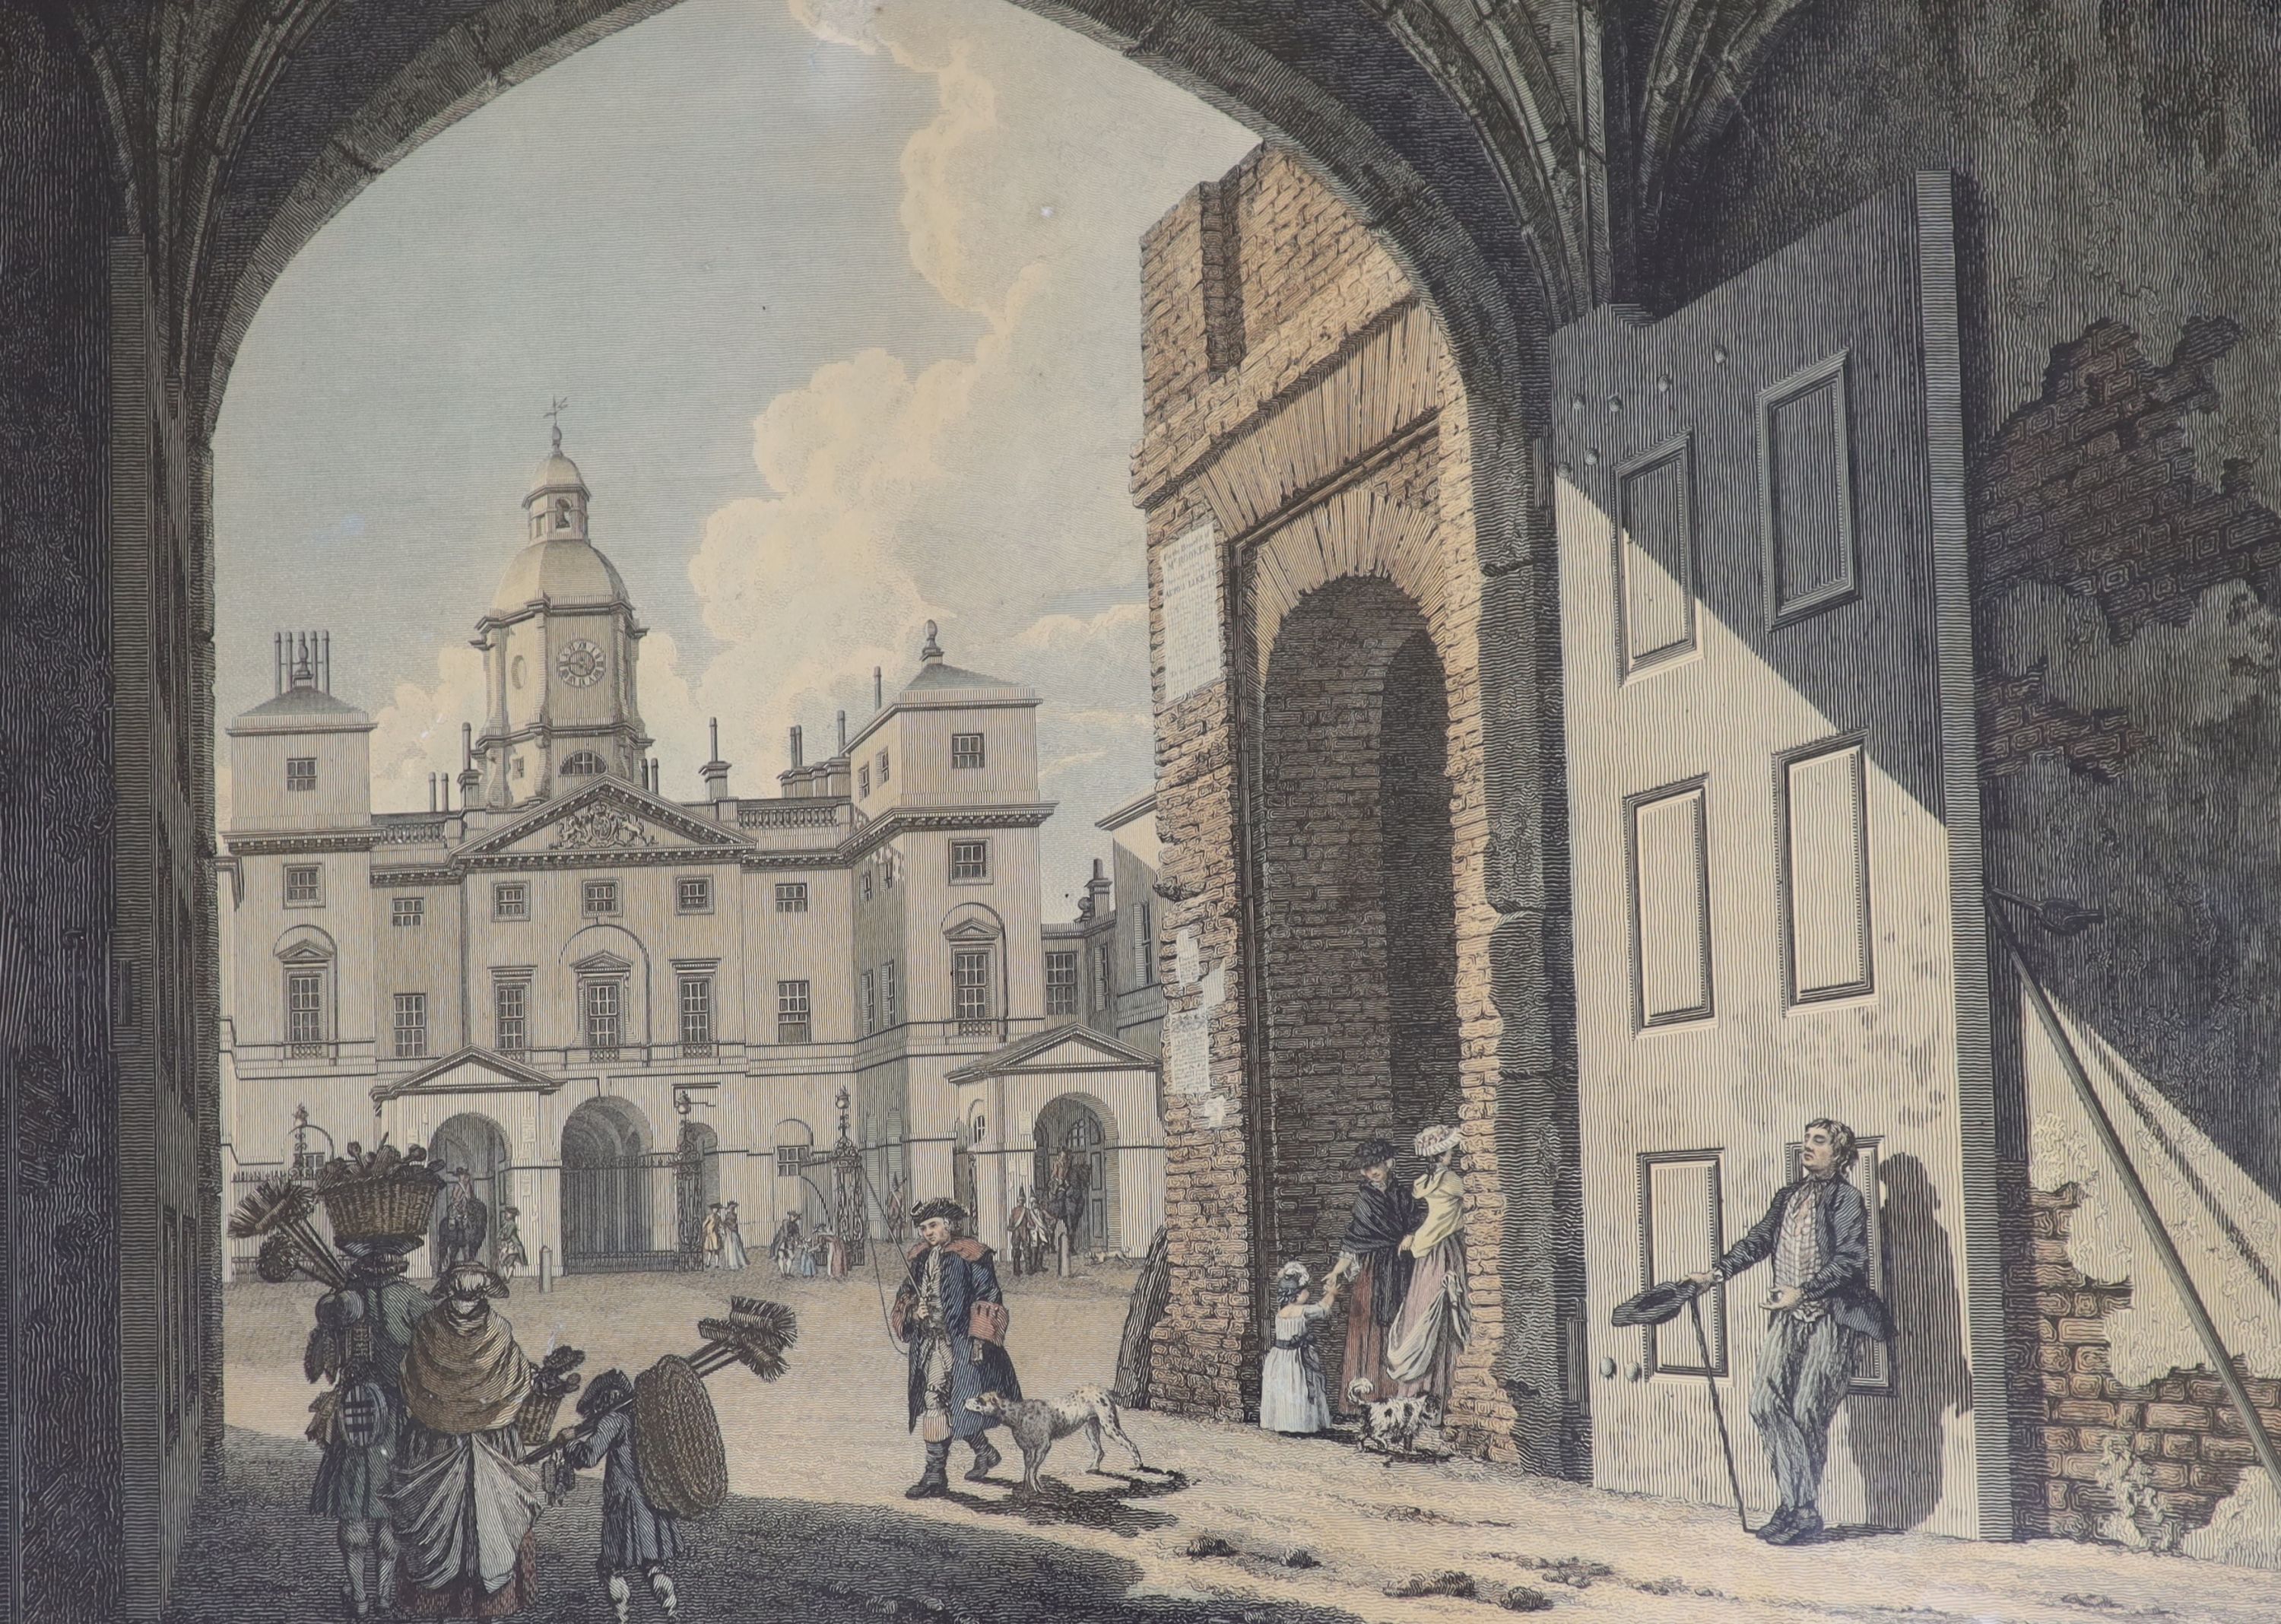 Rooker after Sandby, pair of hand coloured engravings, The Horseguards and Scotland Yard, 40 x 55cm